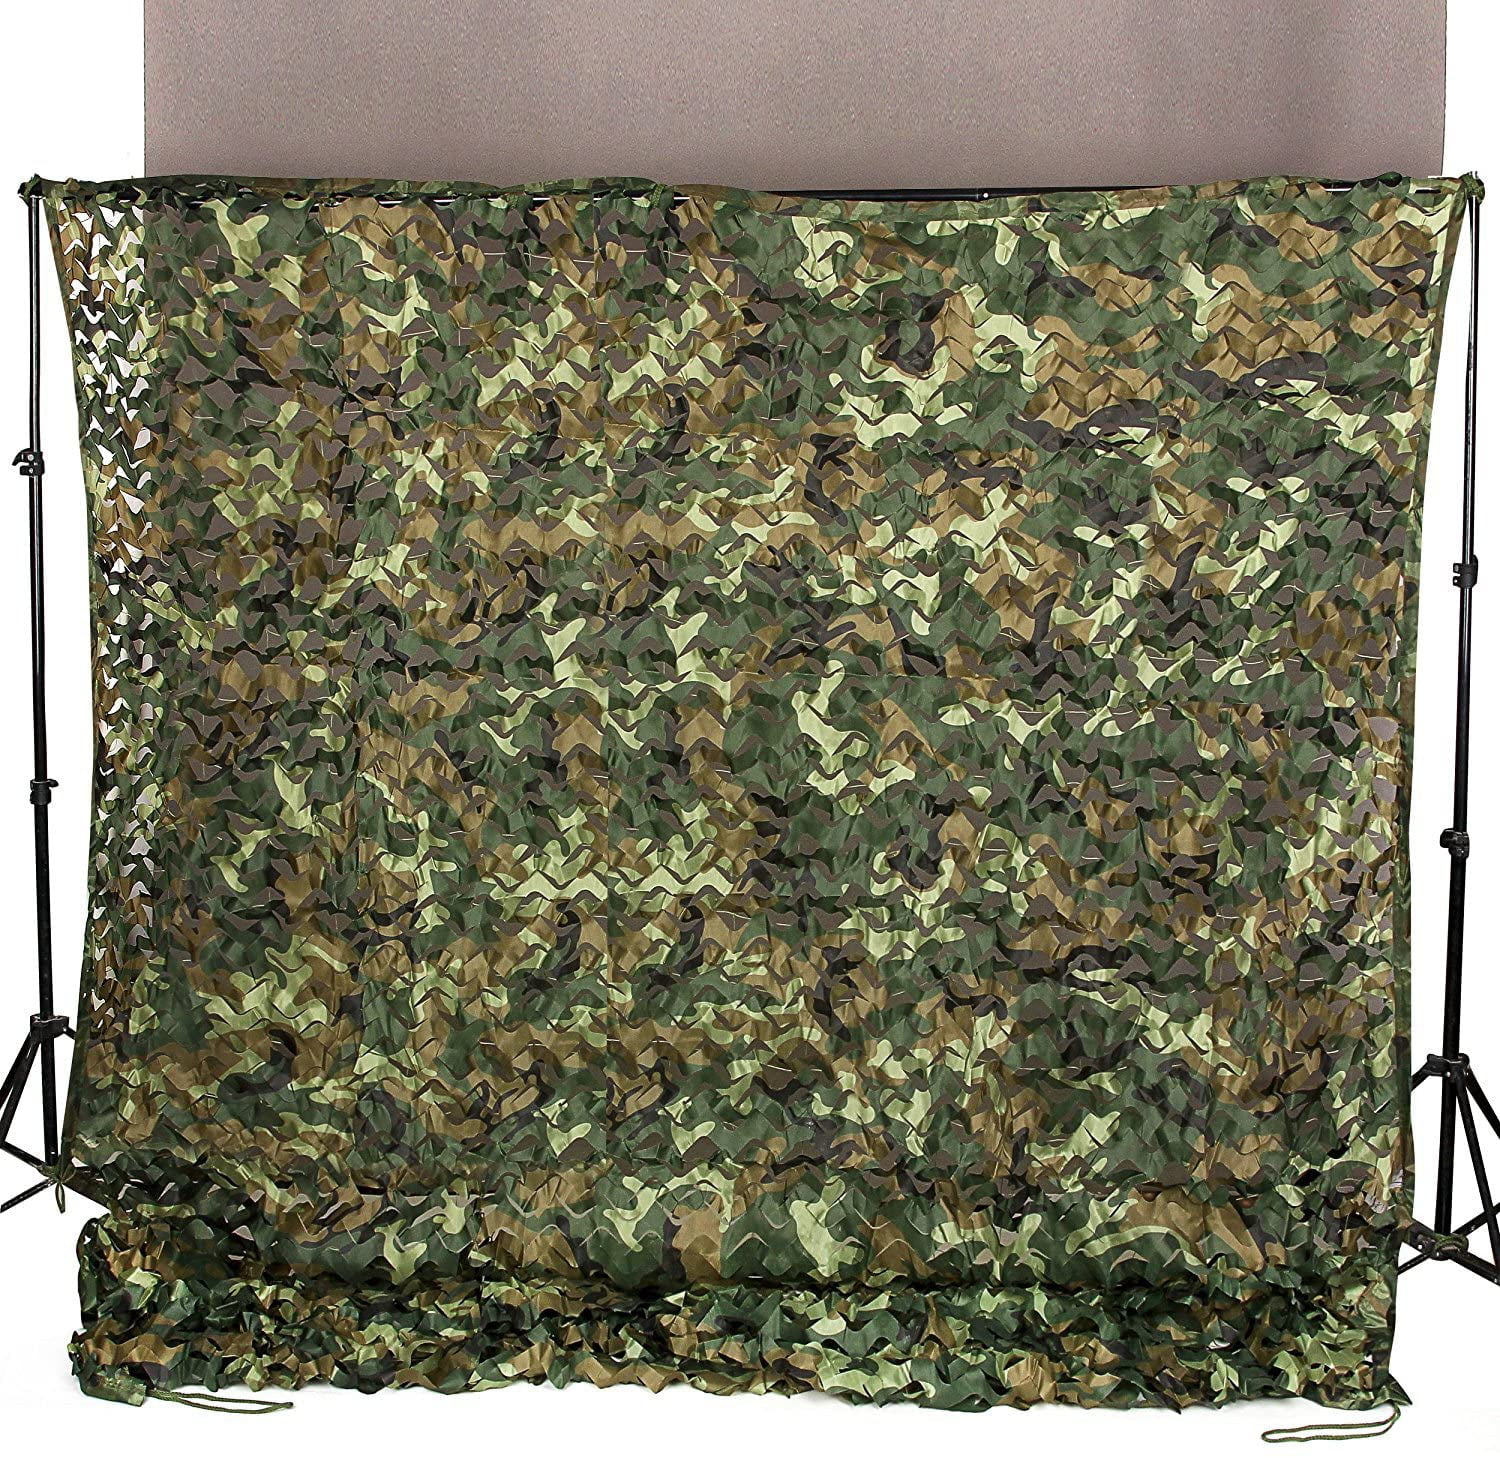 Portable Net Shelter 2mx3m Woodland Army Camouflage Camping Cover Hide Leaves 